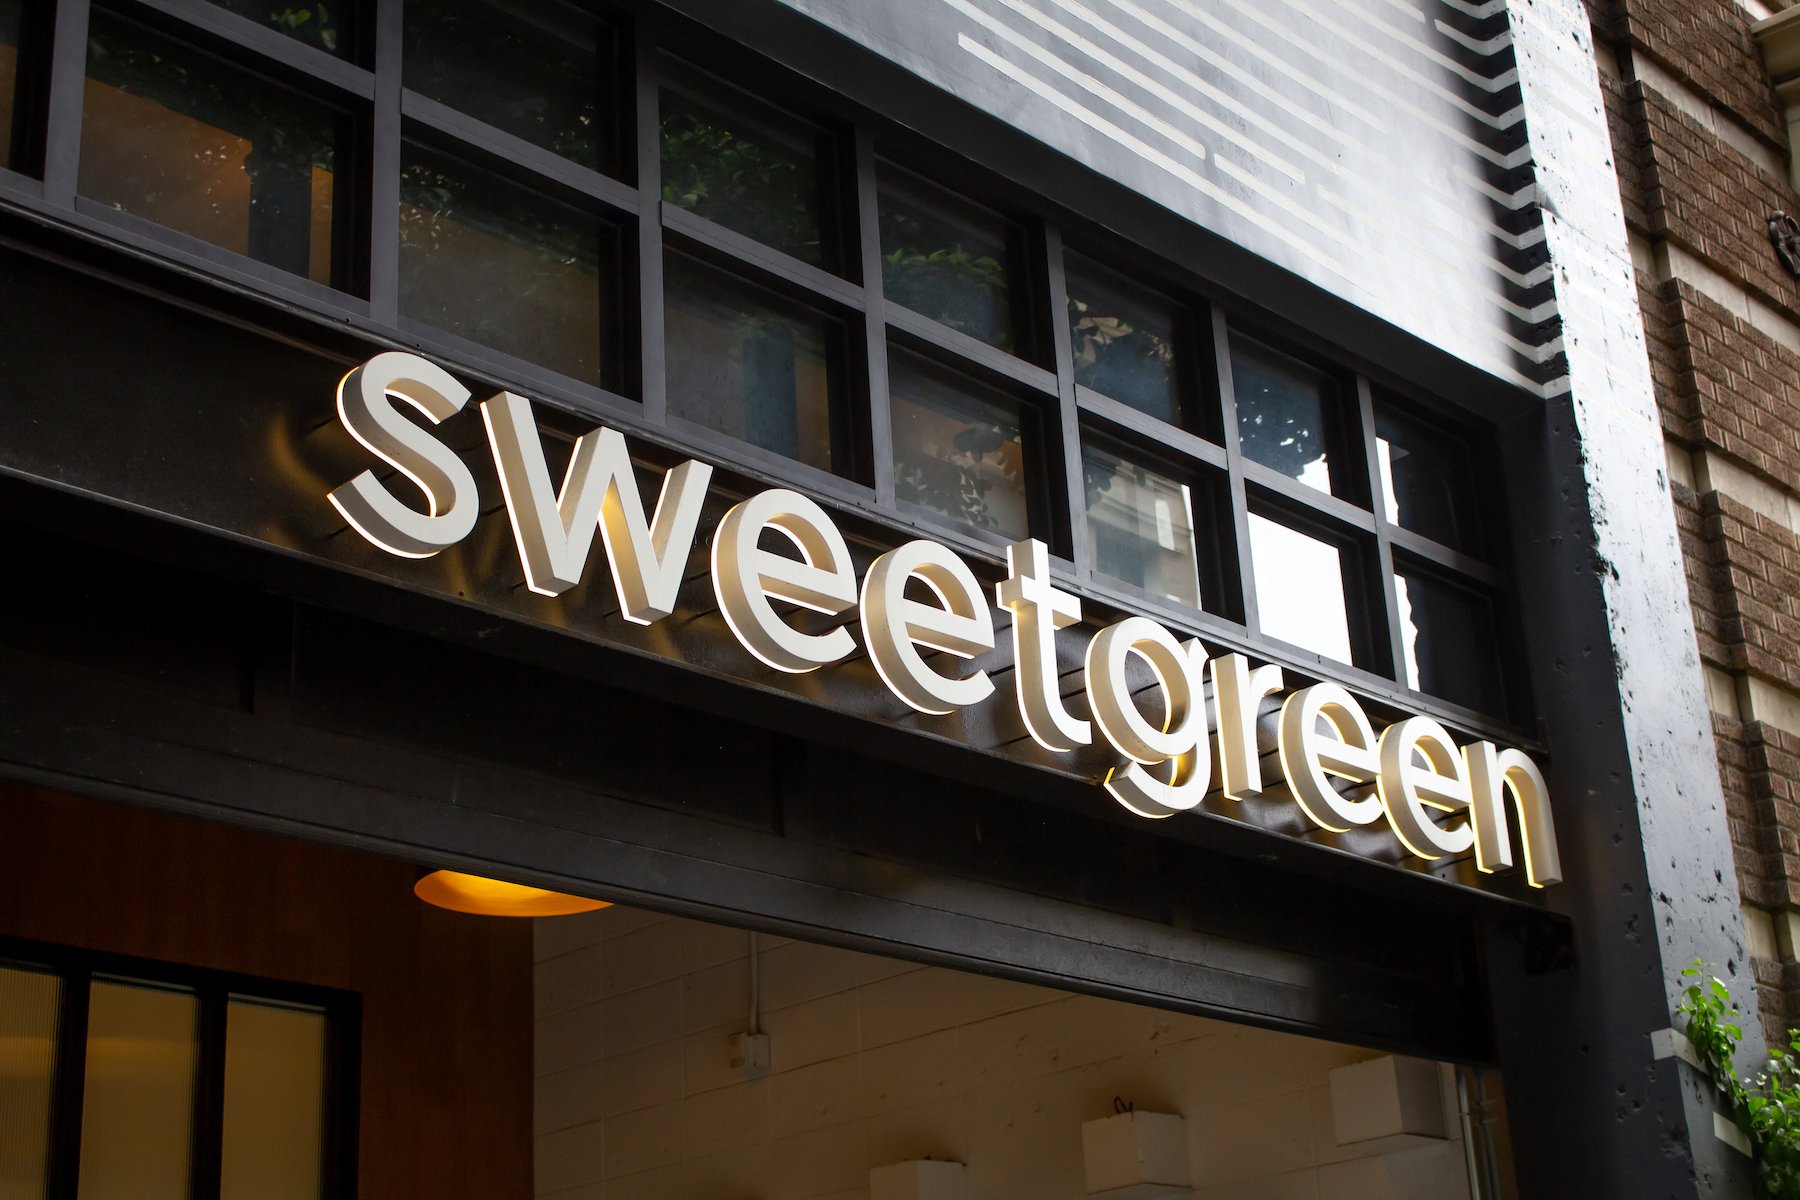 How to order a blood sugar-friendly meal at Sweetgreen